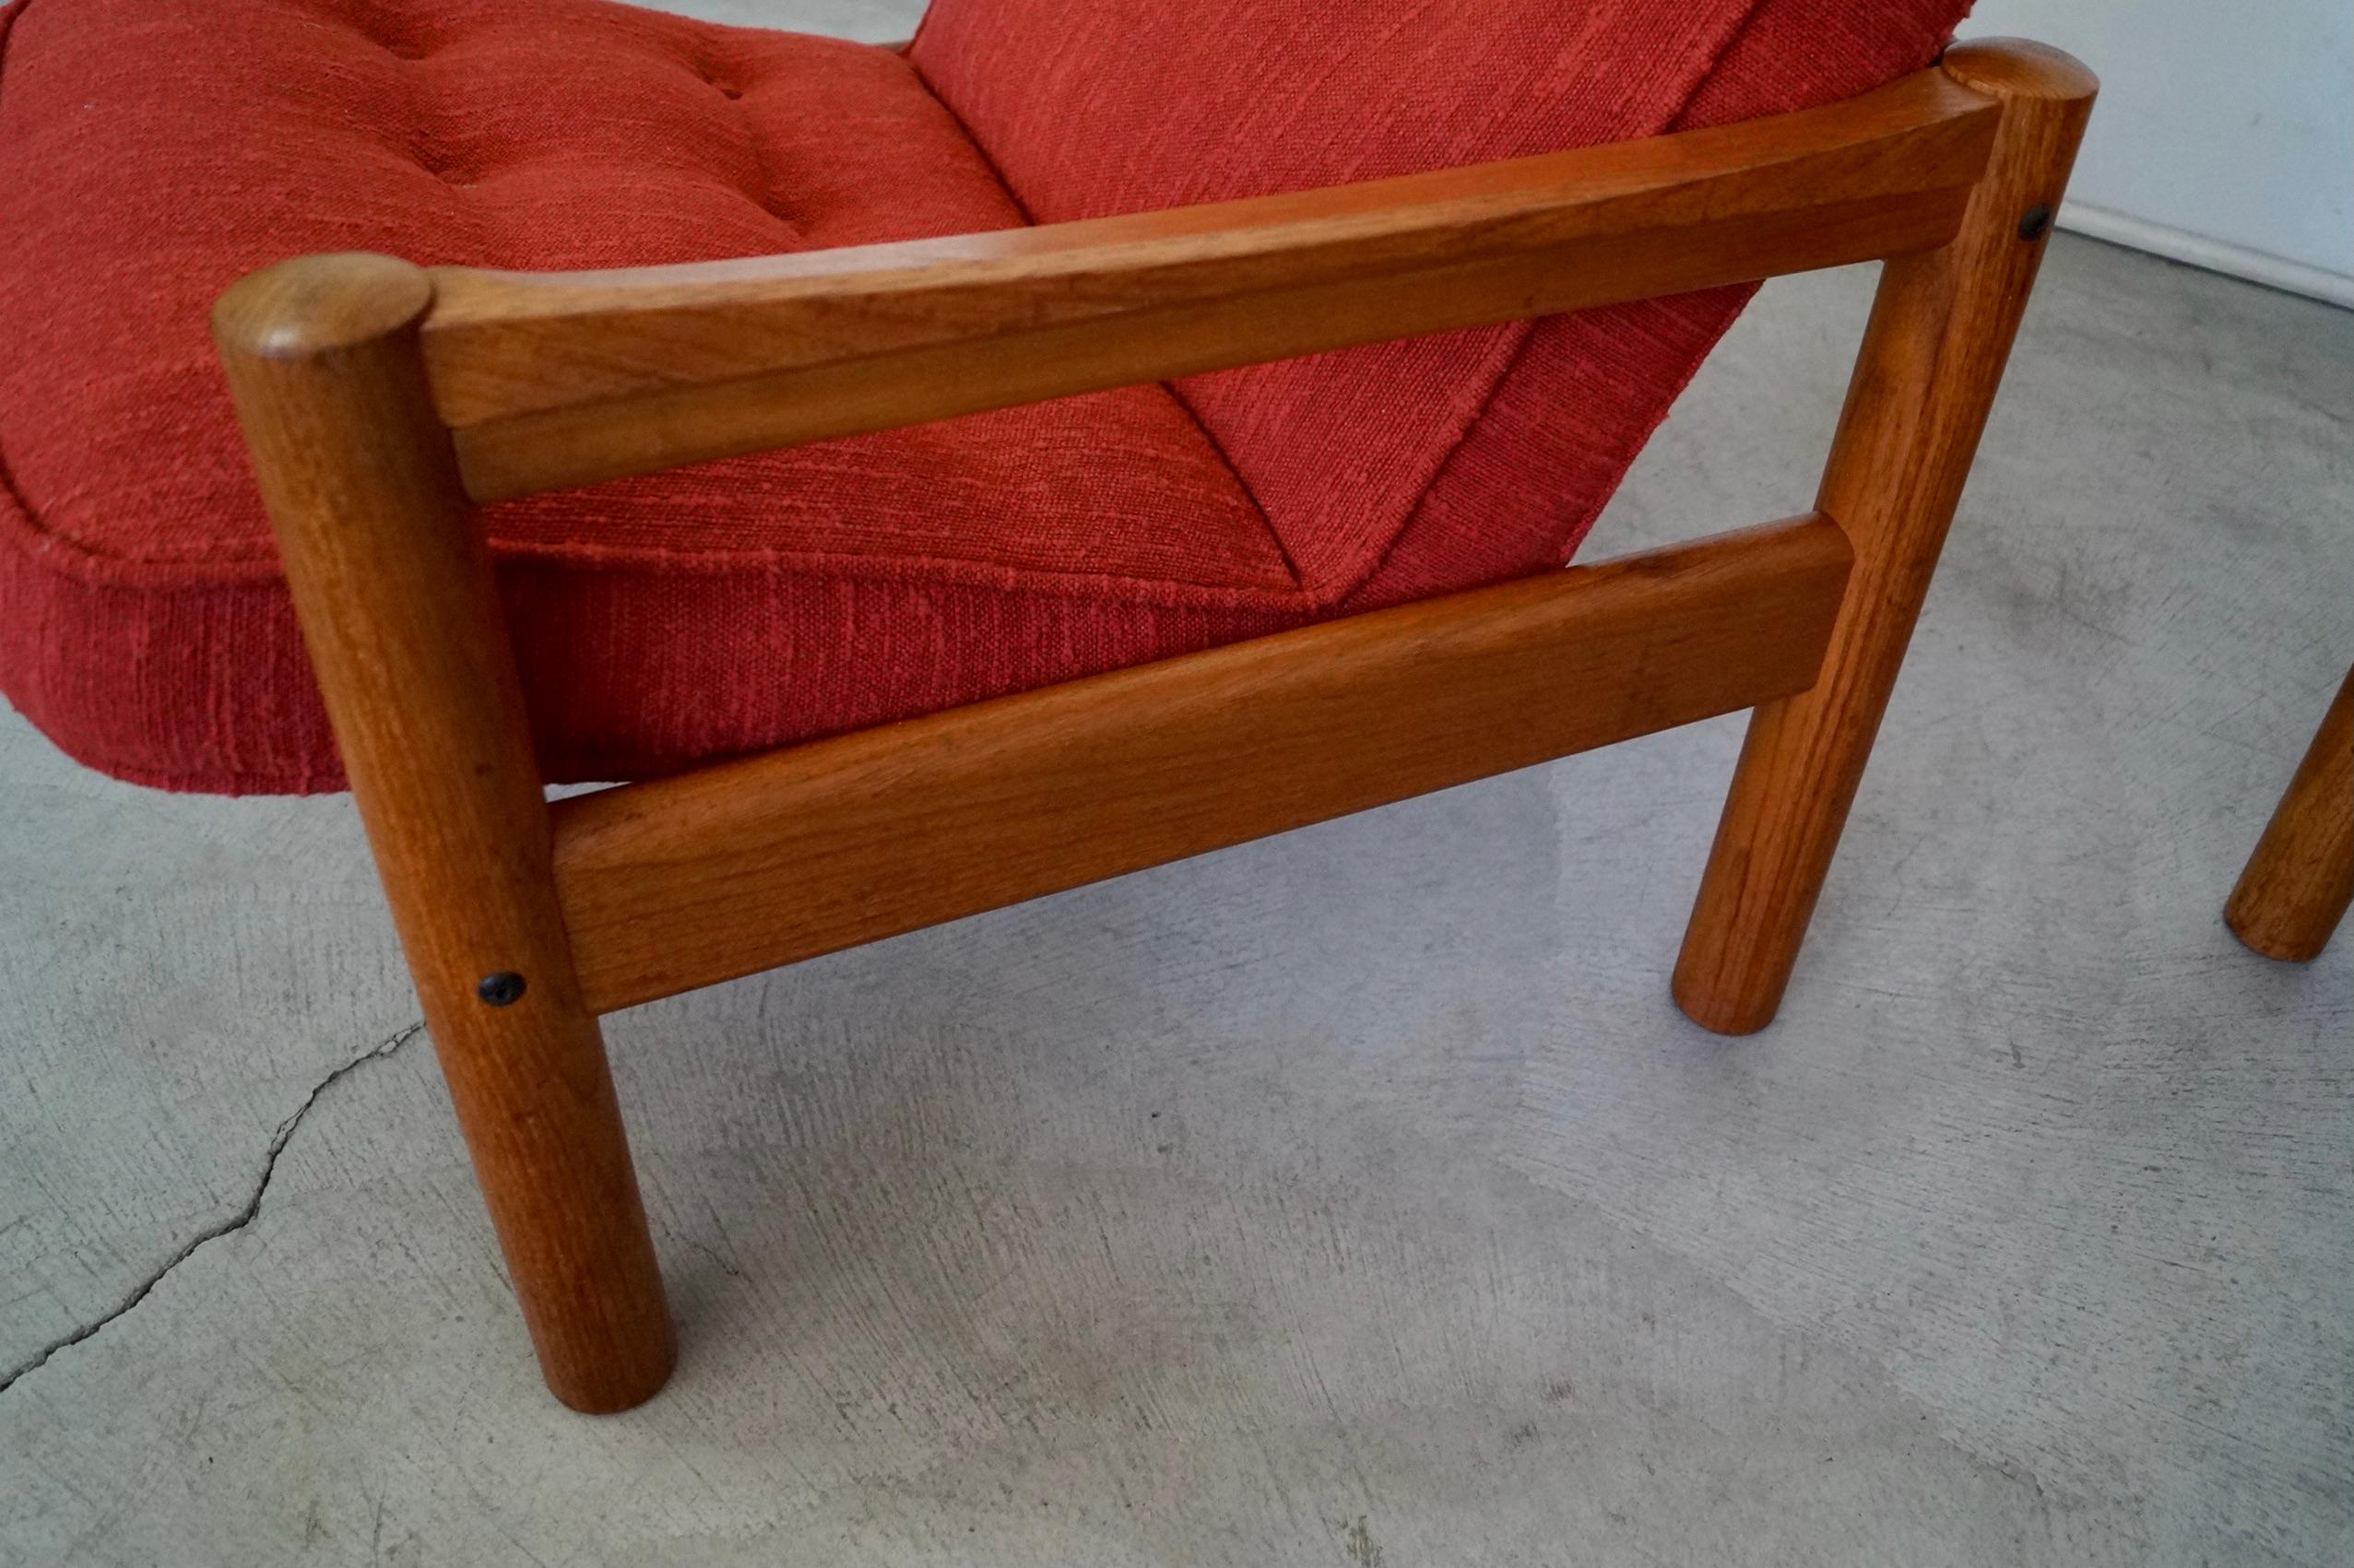 1970's Danish Modern Teak Lounge Chairs by Domino Mobler - a Pair For Sale 9